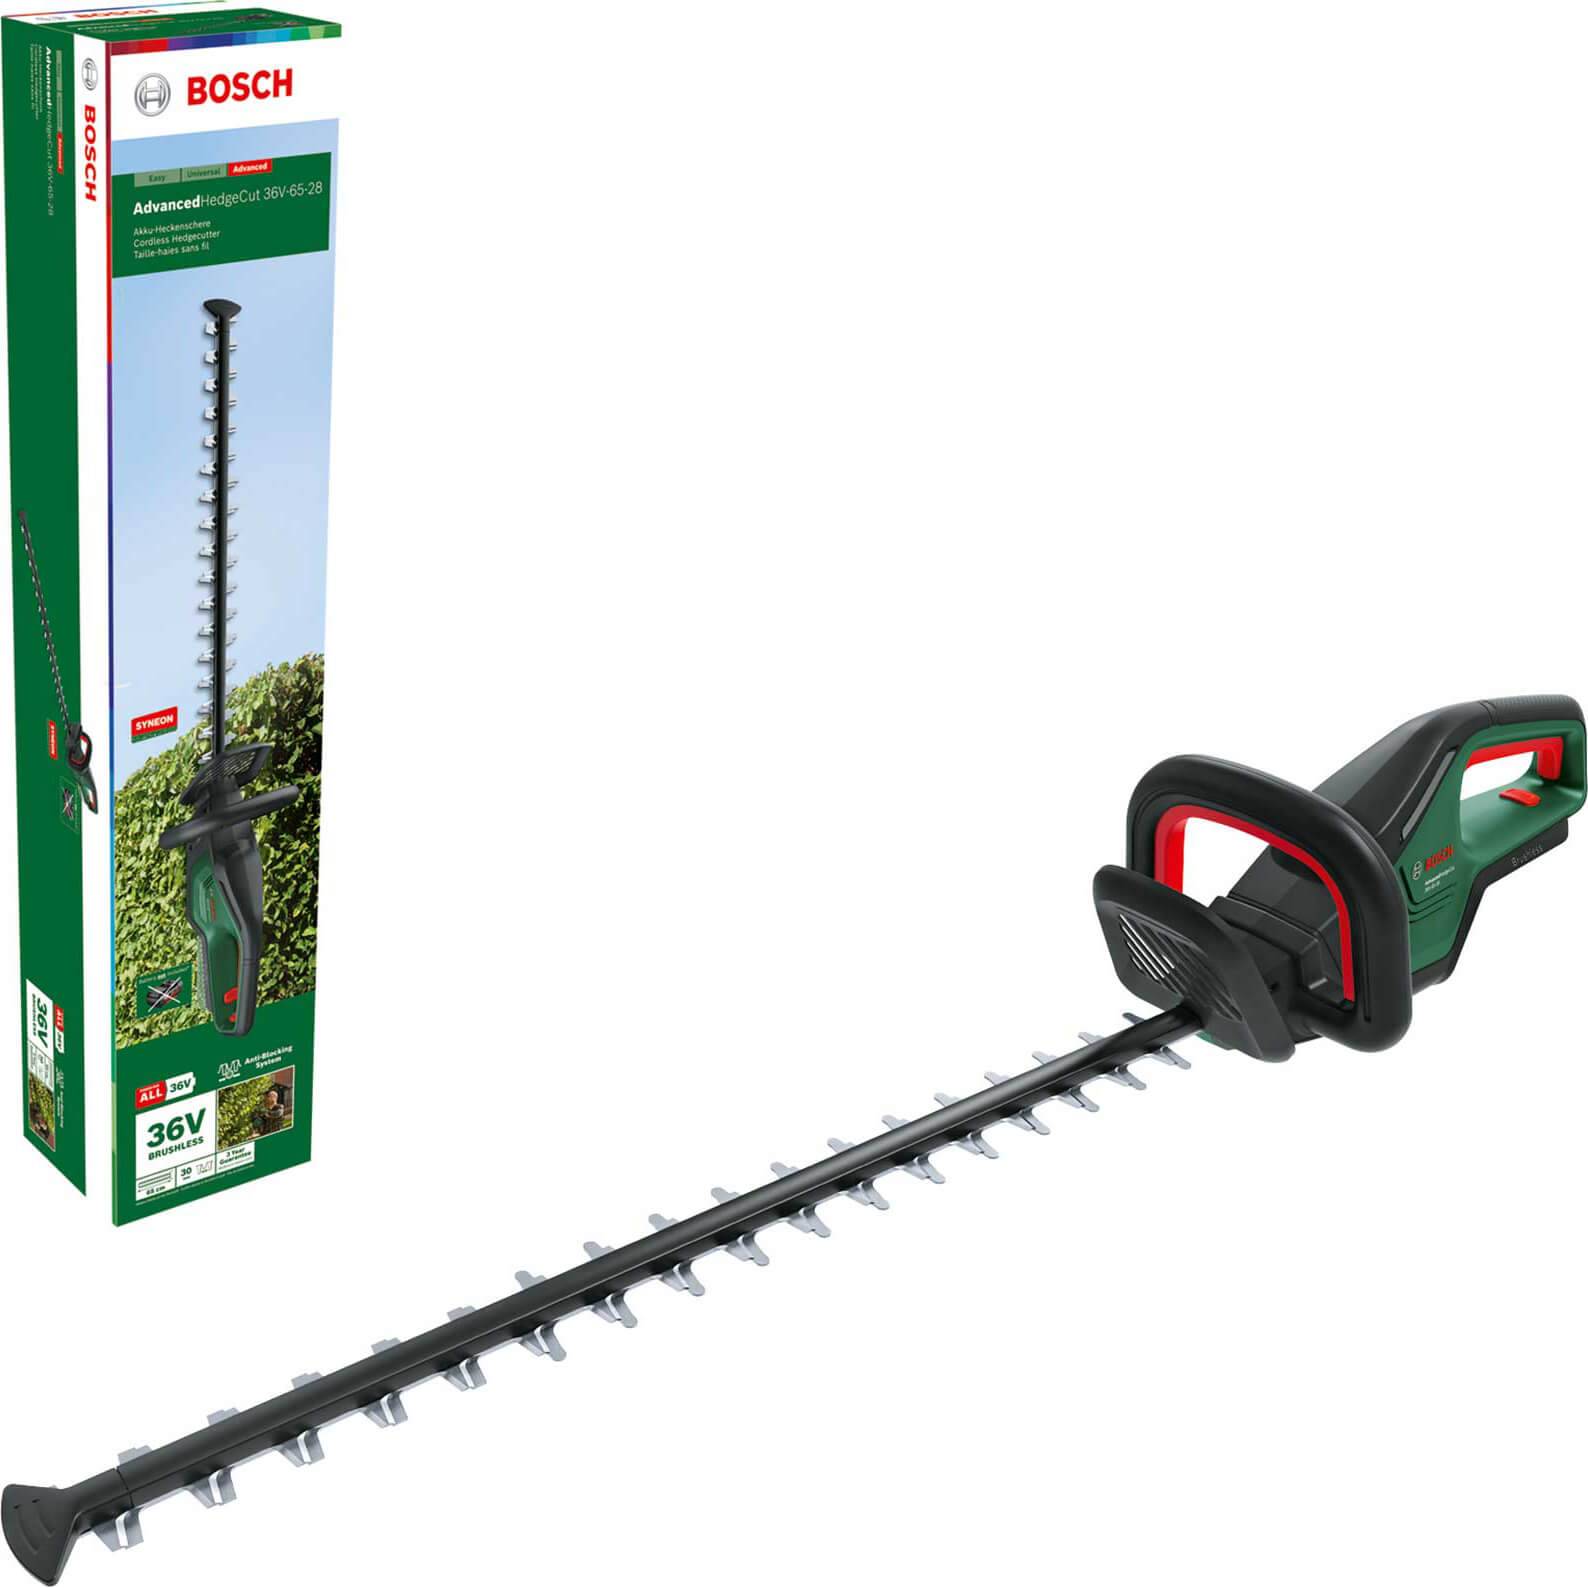 Bosch AHS 65-34 Electric Hedge Cutter Black and Green 650 mm Blade Length 